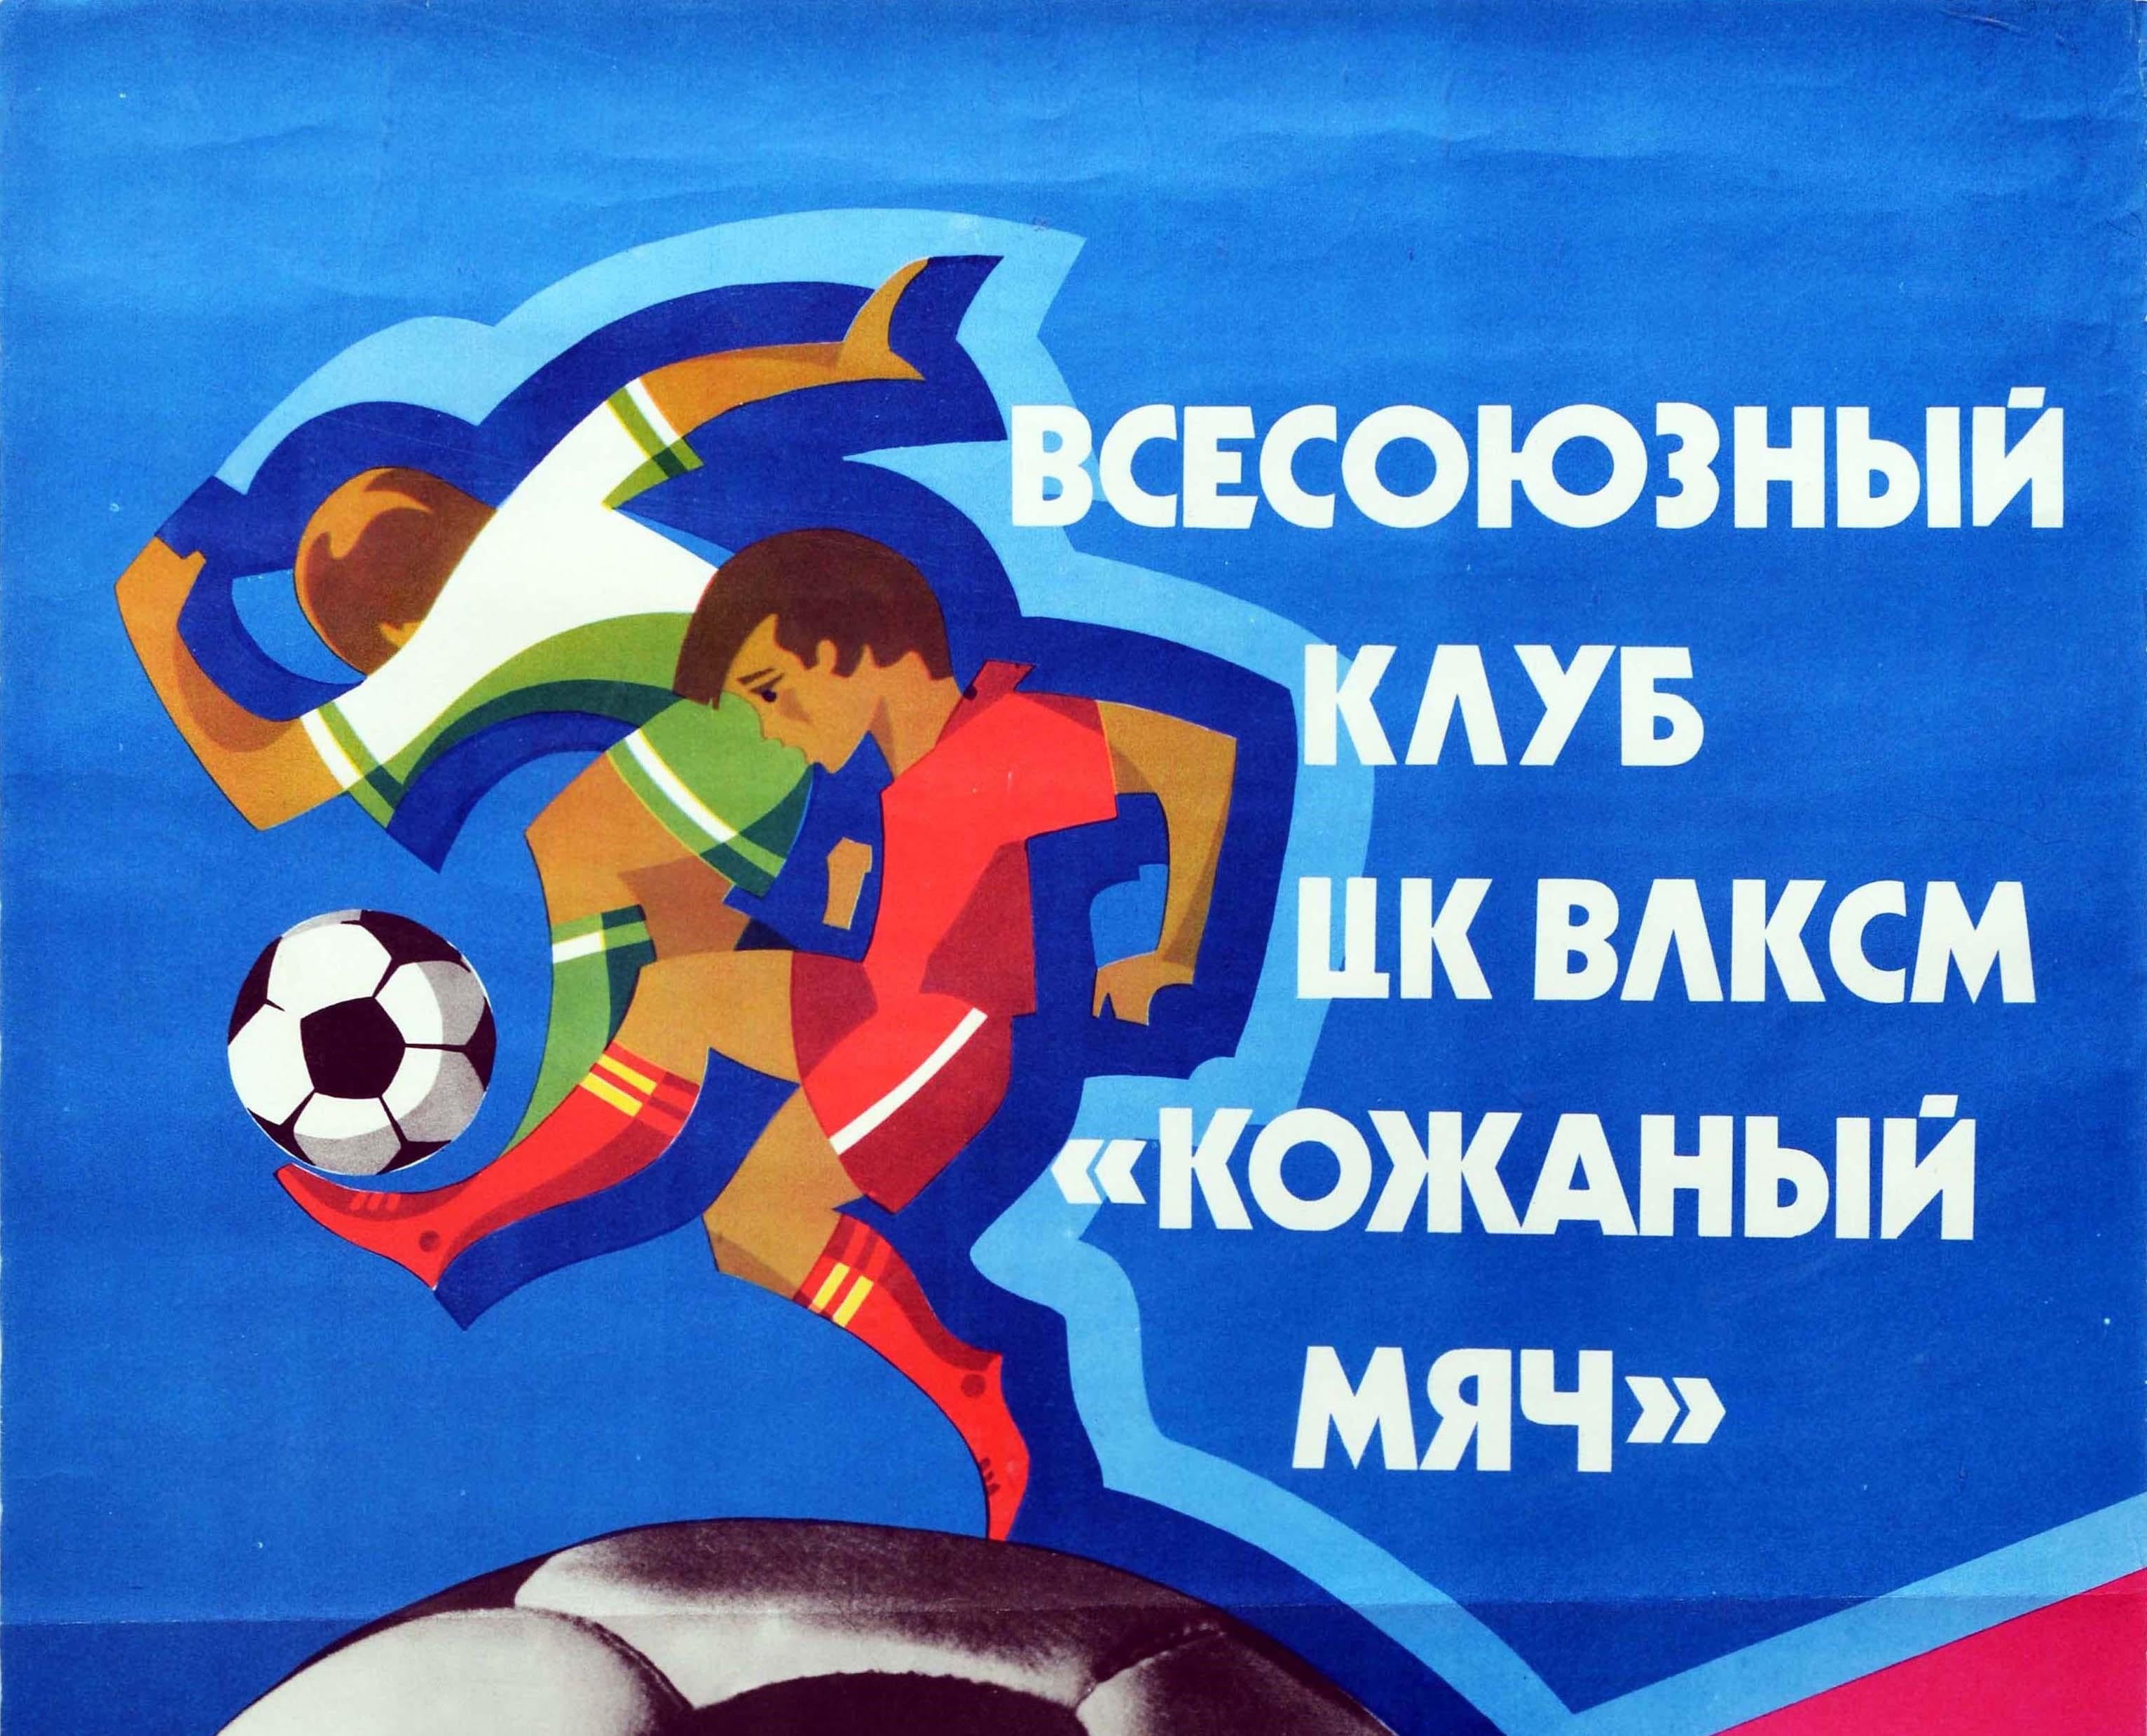 Original vintage Soviet propaganda poster celebrating the 20 year anniversary of the Leather Ball football club with the text in white and red lettering over the image reading - ?????????? ???? ?? ????? ??????? ??? 20 ??? / All-Union Club of the